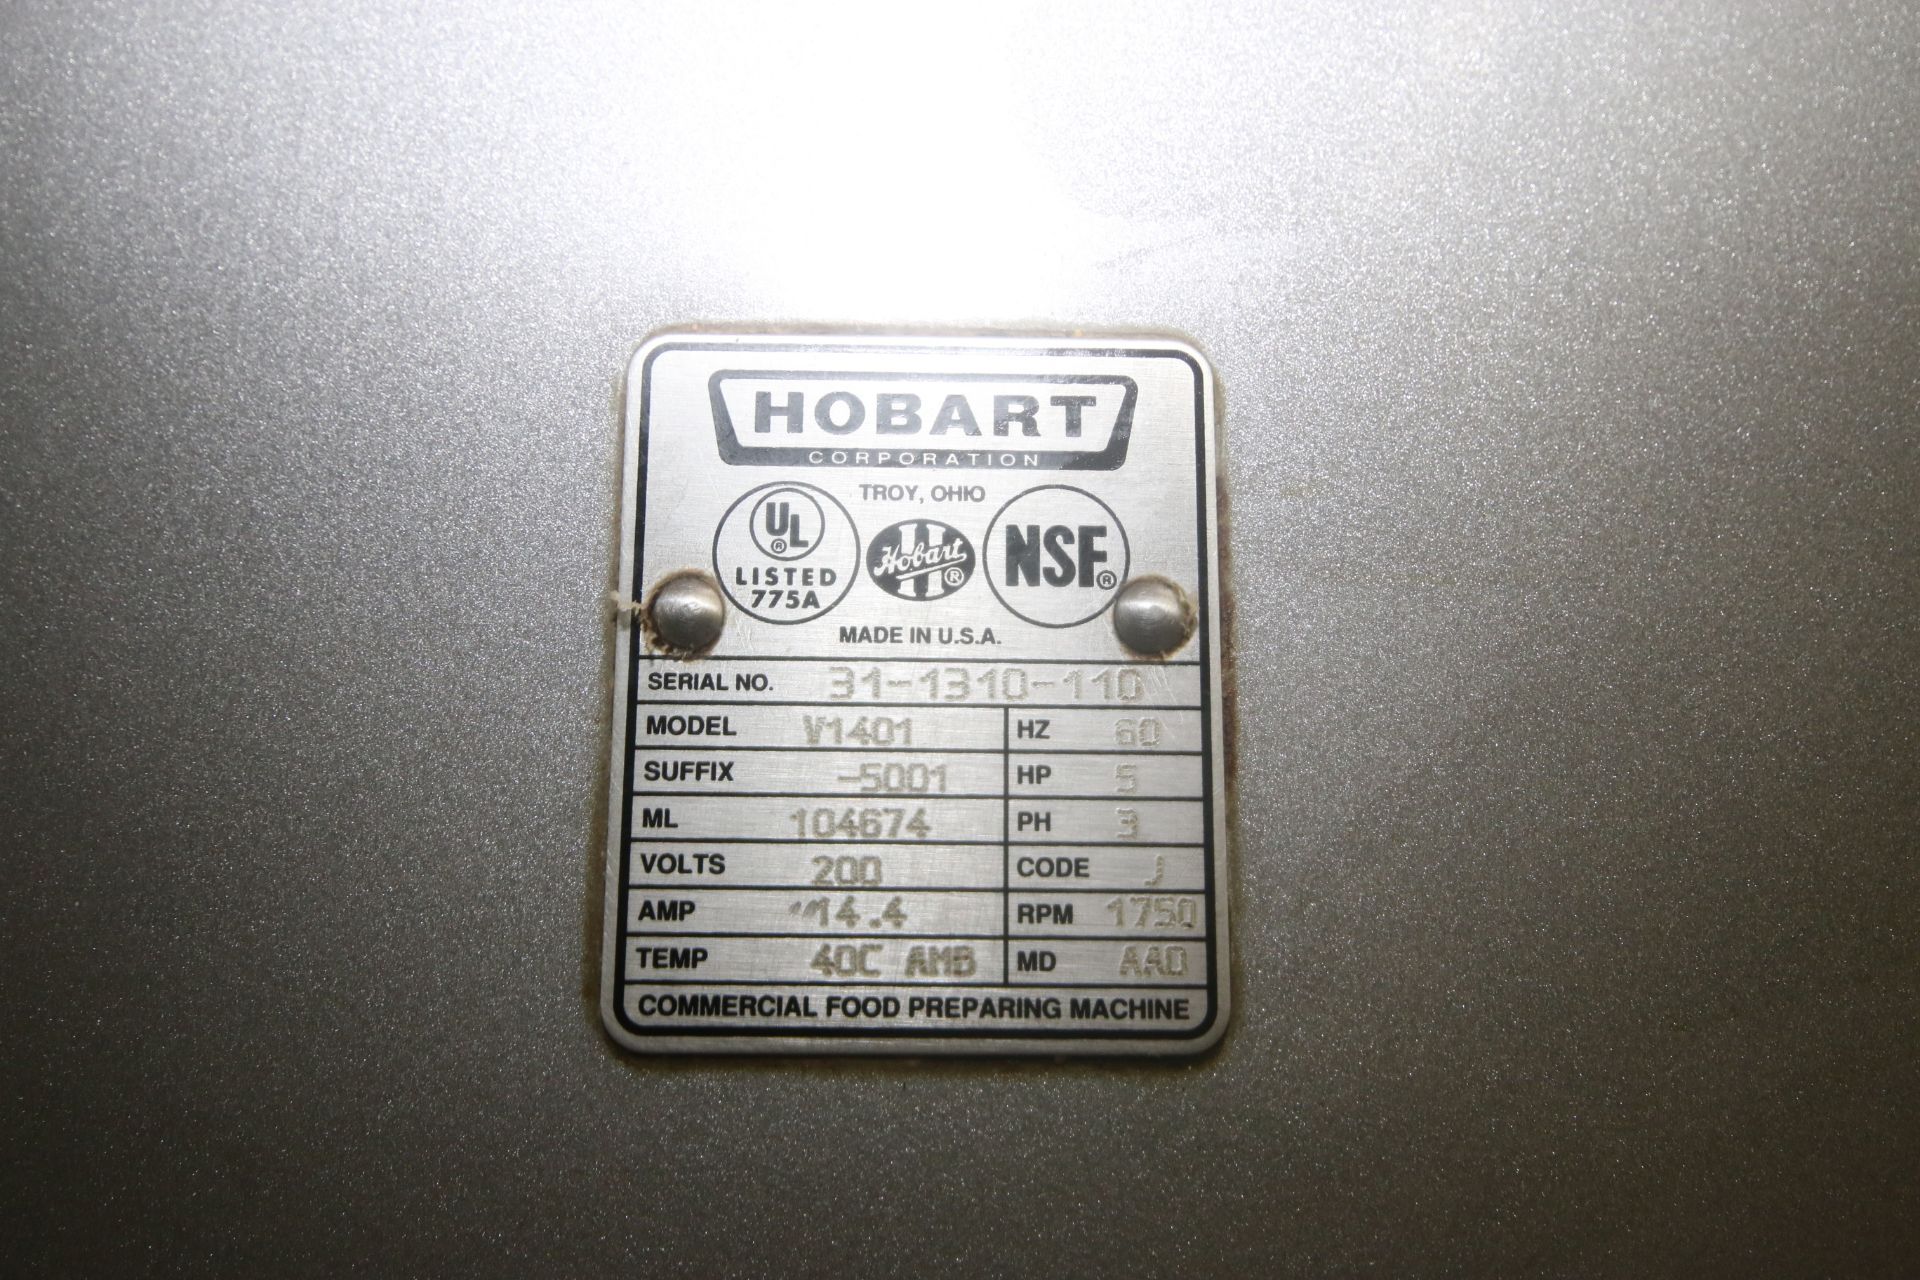 Hobart Mixer, M/N V1401, S/N 31-1310-110, with 5 hp Motor, 1750 RPM, 200 Volts, 3 Phase, with S/S - Image 8 of 9